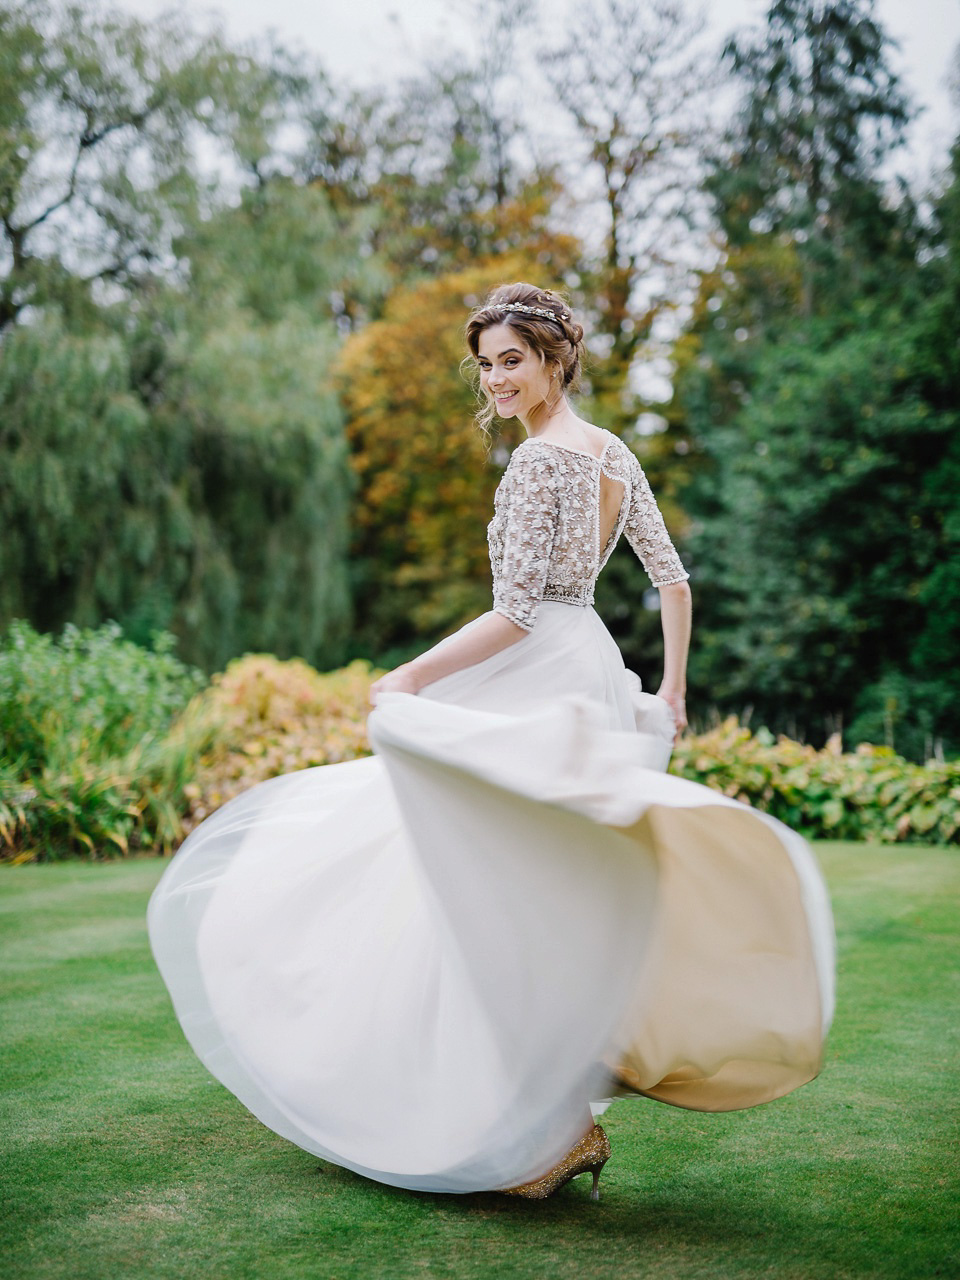 Bride Thea wears a Halfpenny London gown for her laid back dinner party wedding. Photography by John Barwood.